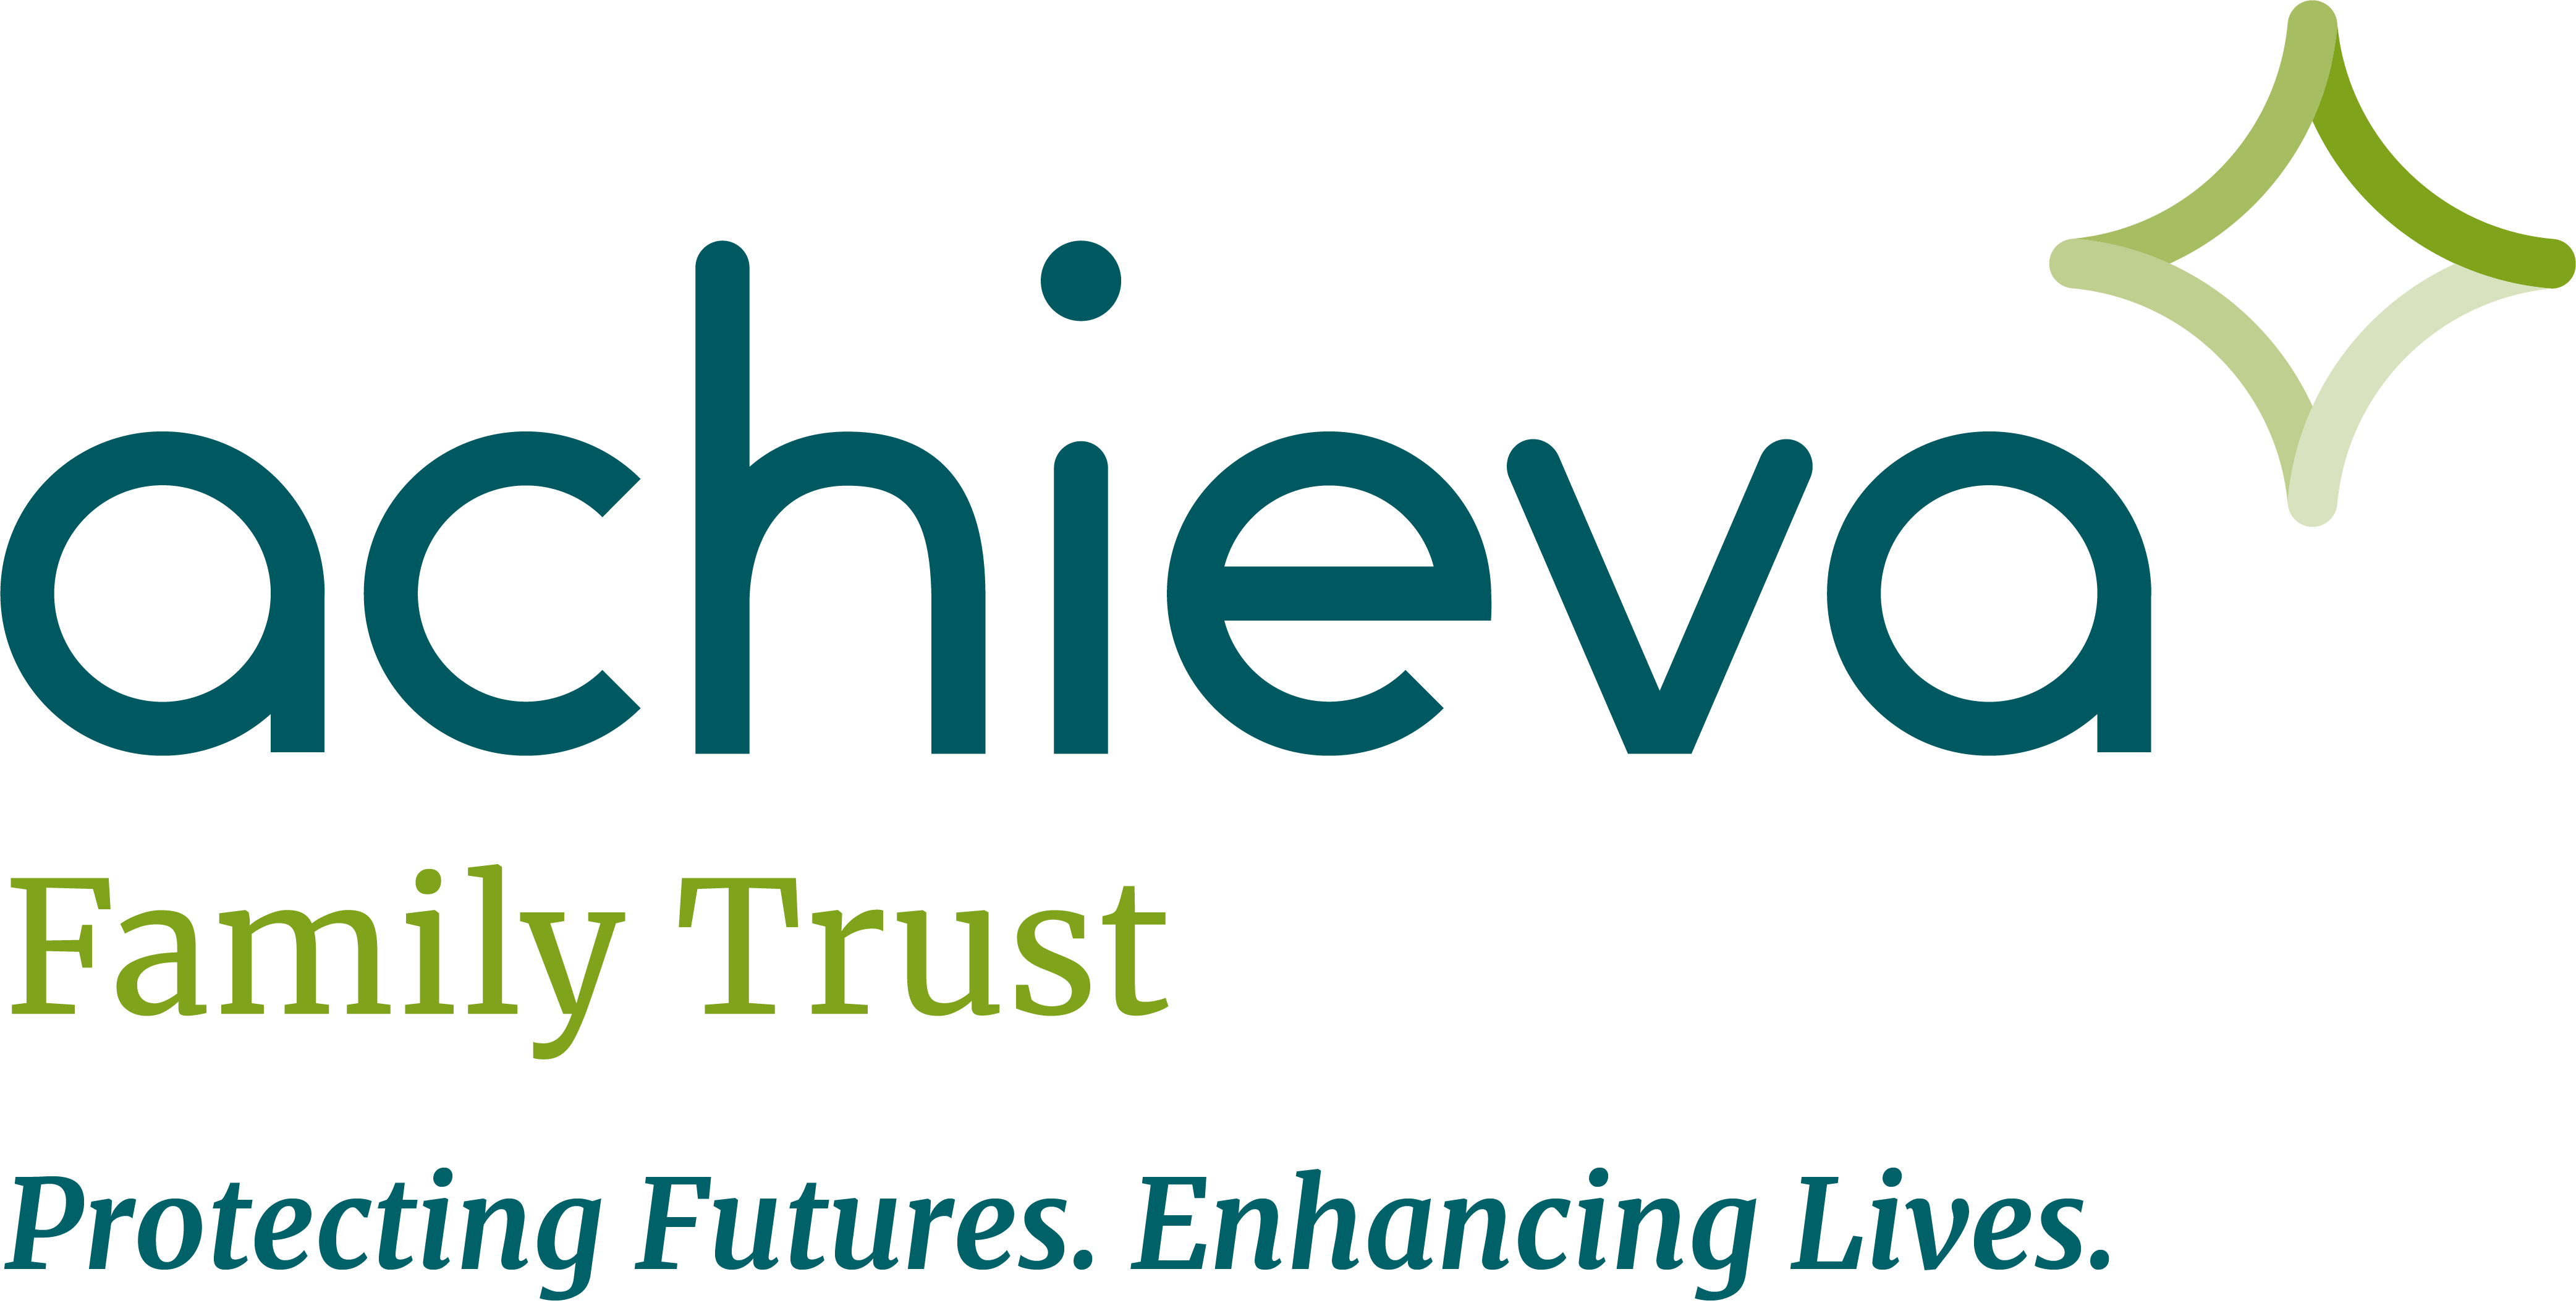 Achieva Family Trust Recognizes Two Important Observations in May